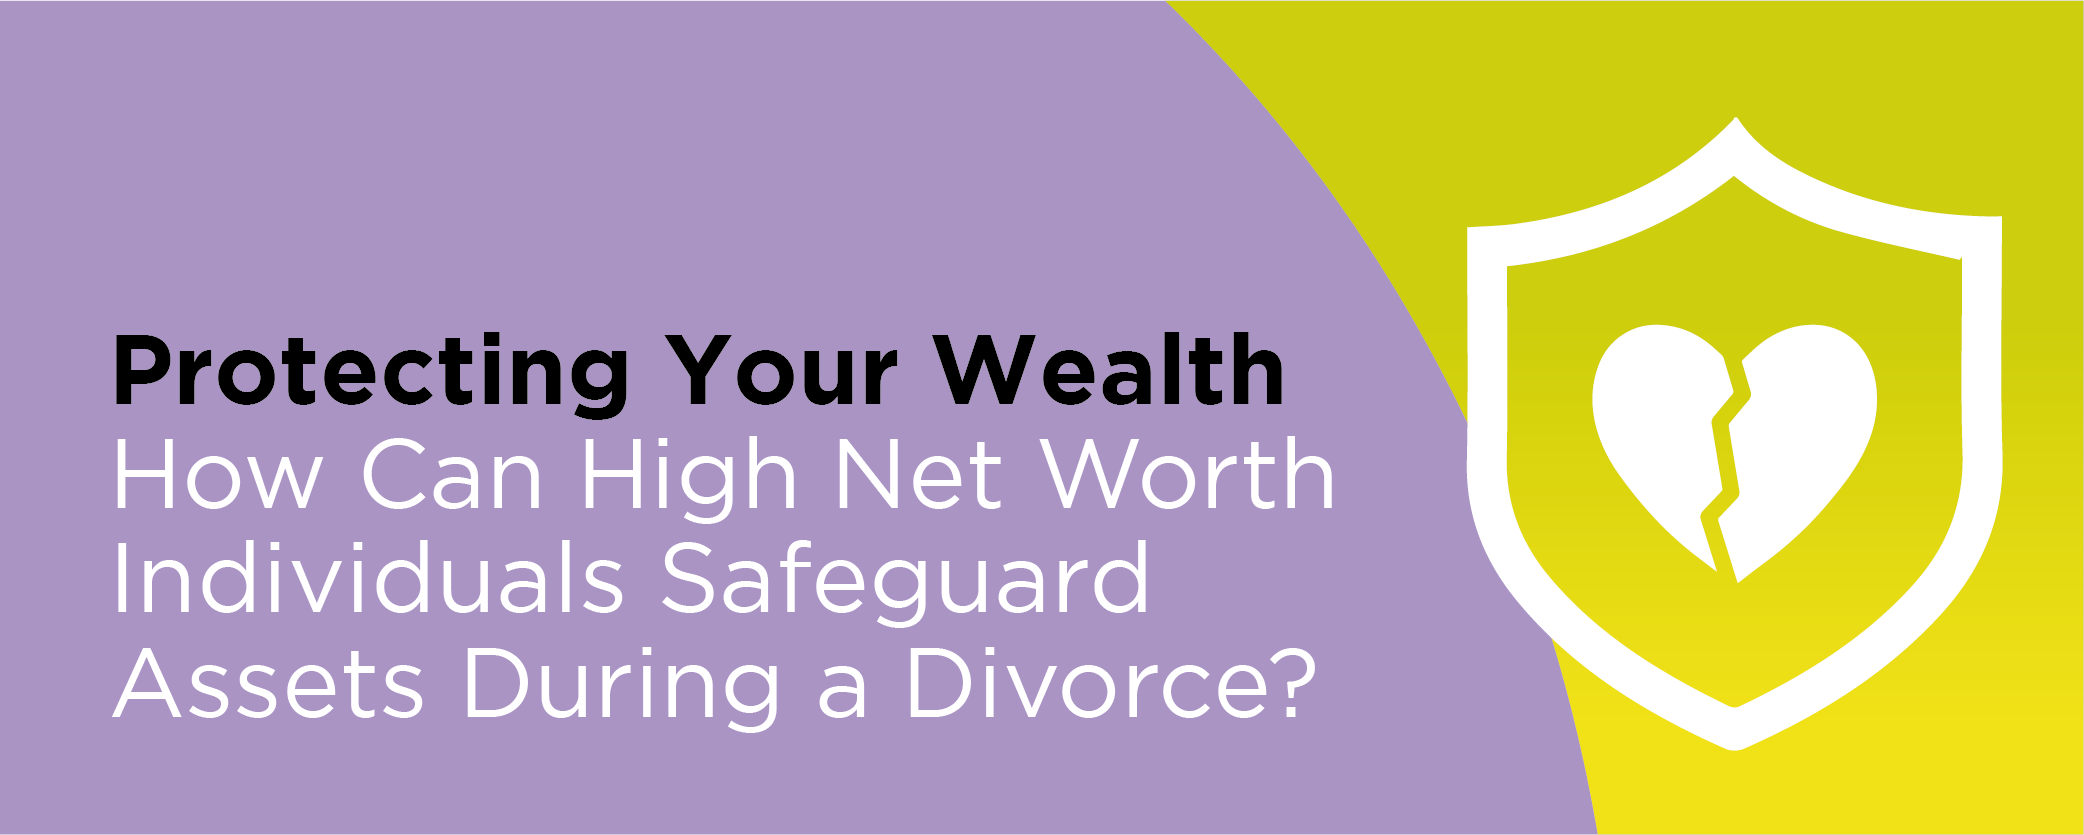 Protecting Your Wealth: How can high net worth individuals safeguard assets during a divorce?